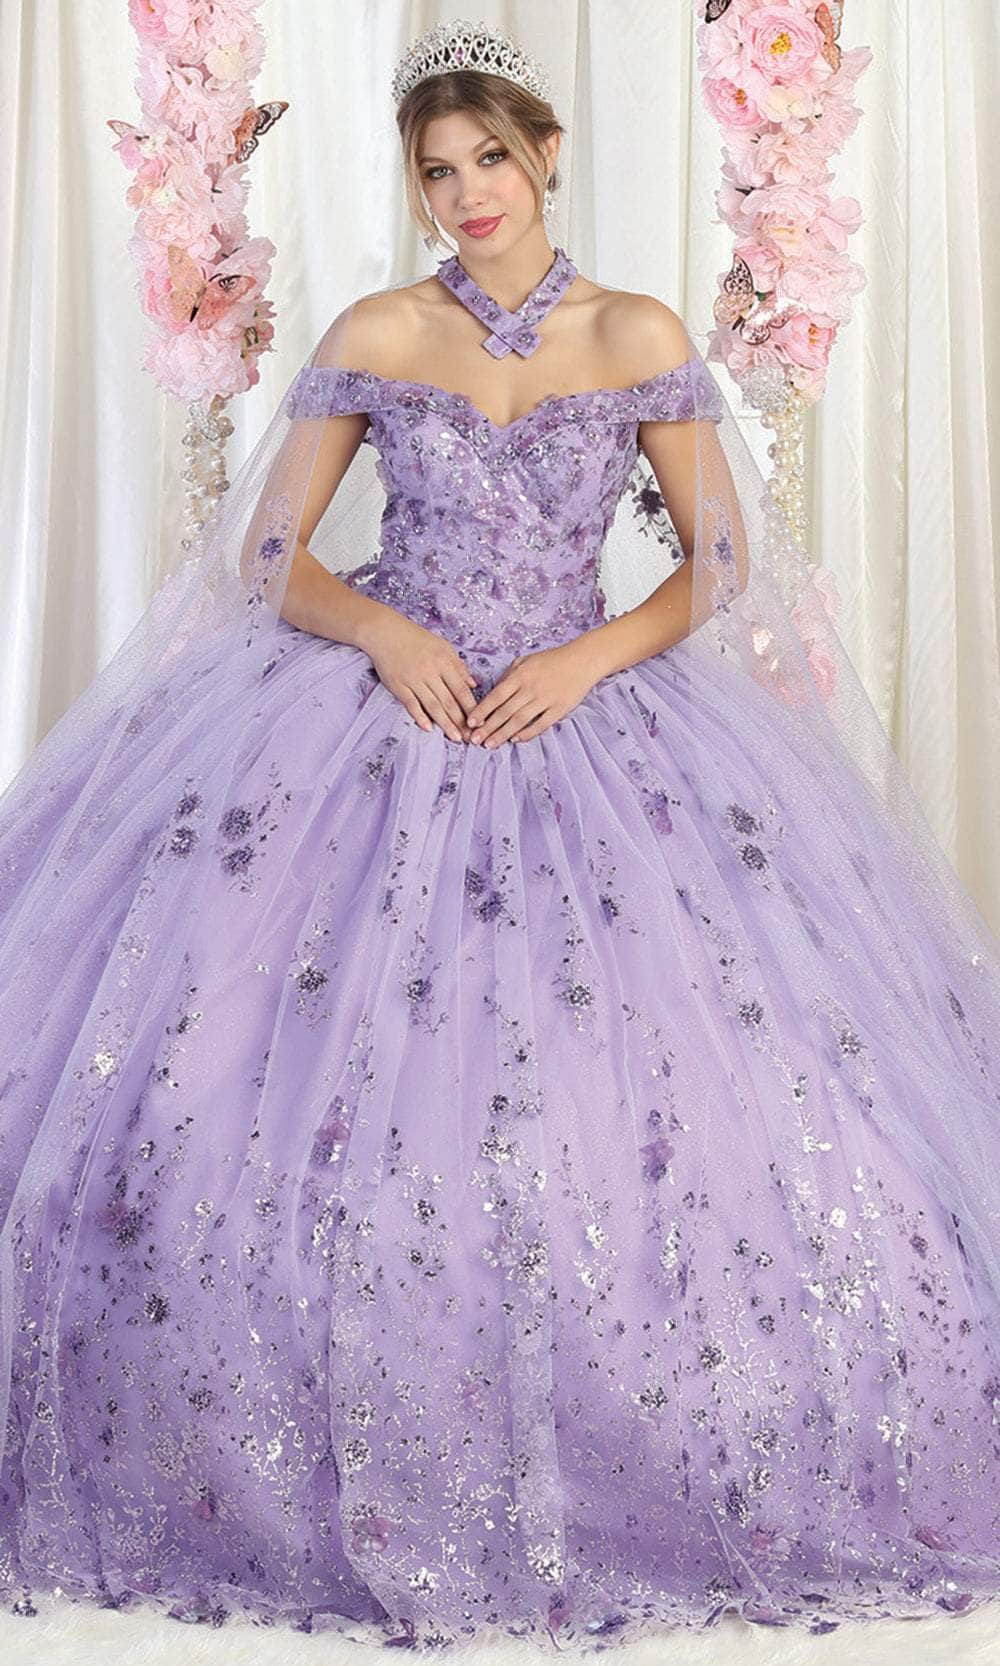 Image of May Queen LK202 - Quinceanera Gown with Choker Necklace